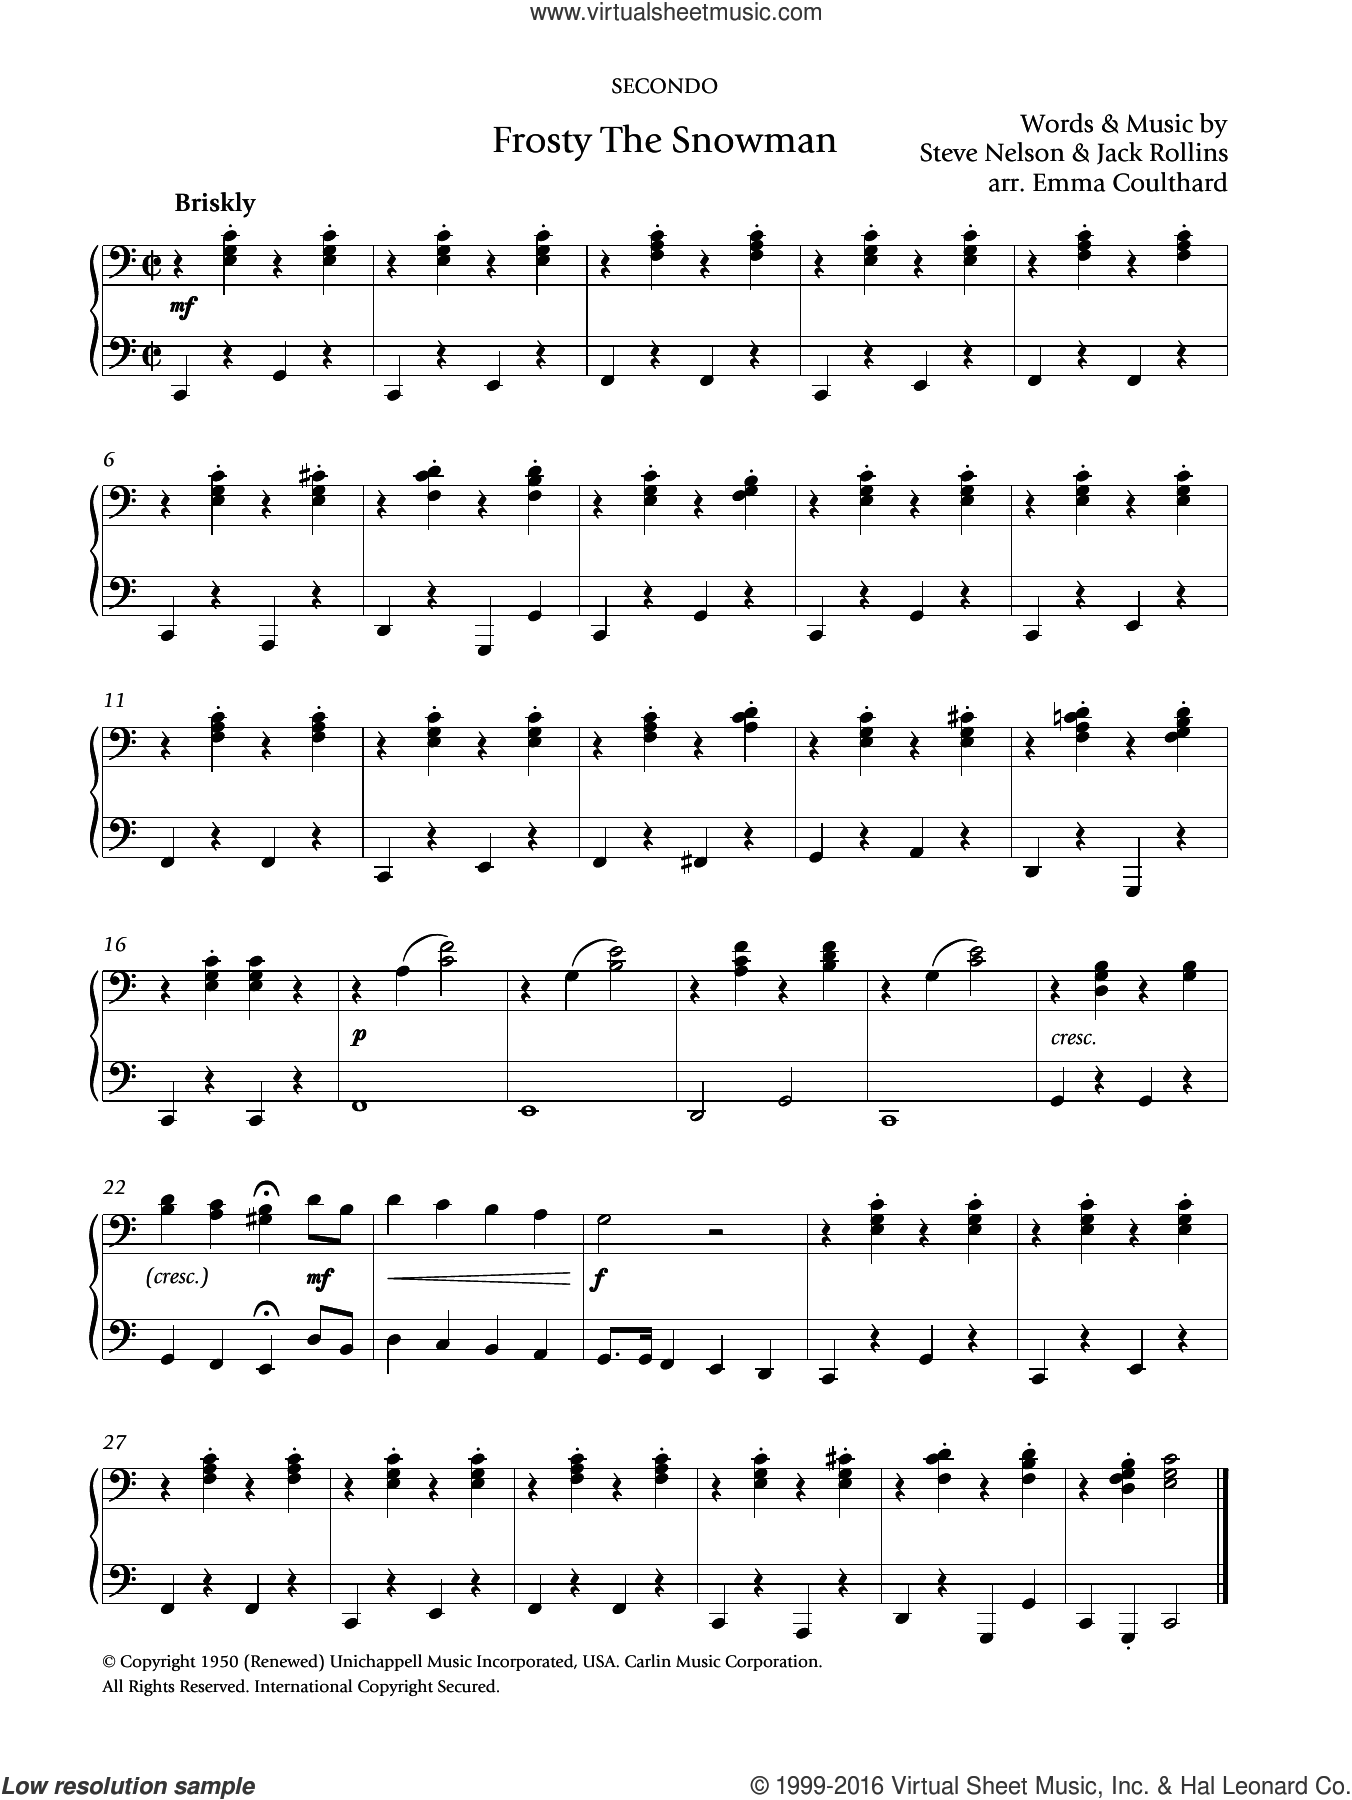 Autry - Frosty The Snowman sheet music for piano solo [PDF]